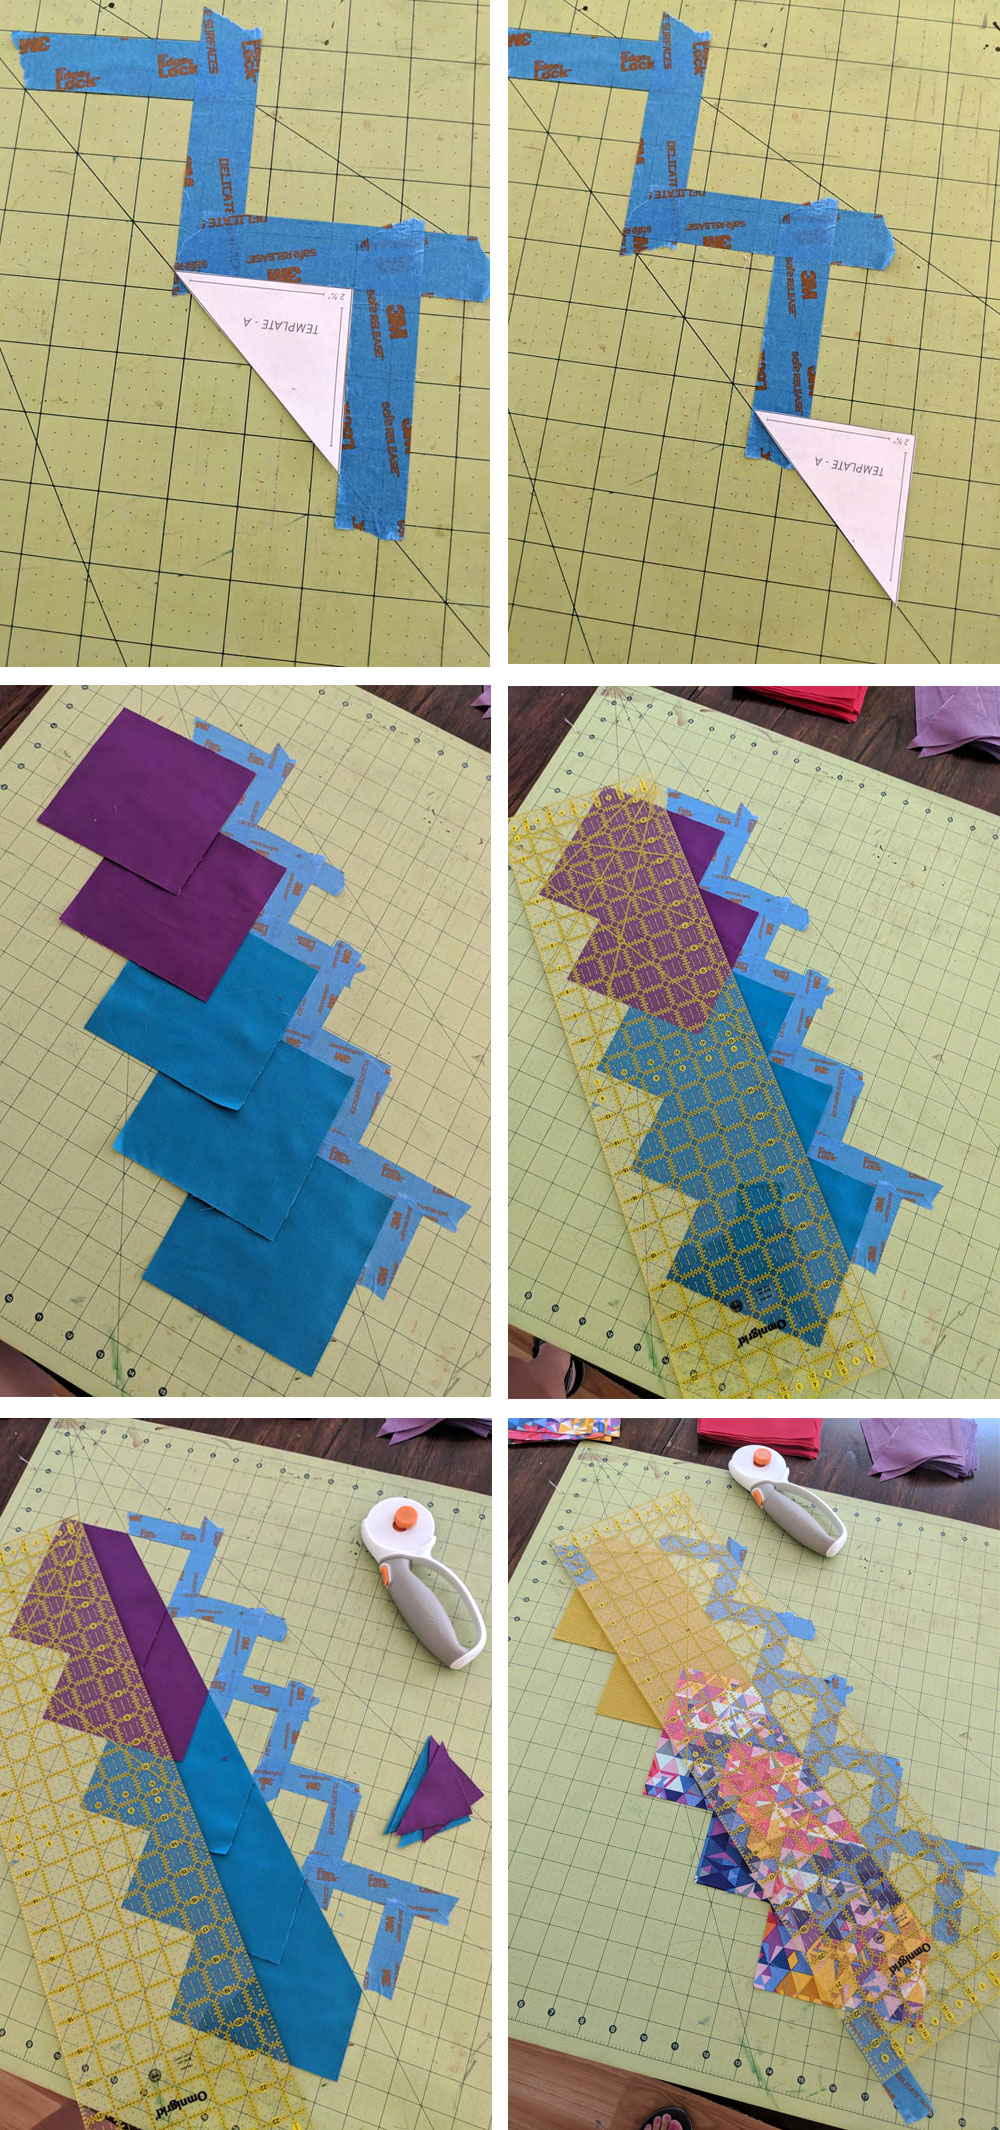 Glitter and Glow quilt pattern cutting hack. | Suzy Quilts https://suzyquilts.com/glitter-glow-quilt-pattern-use-scraps